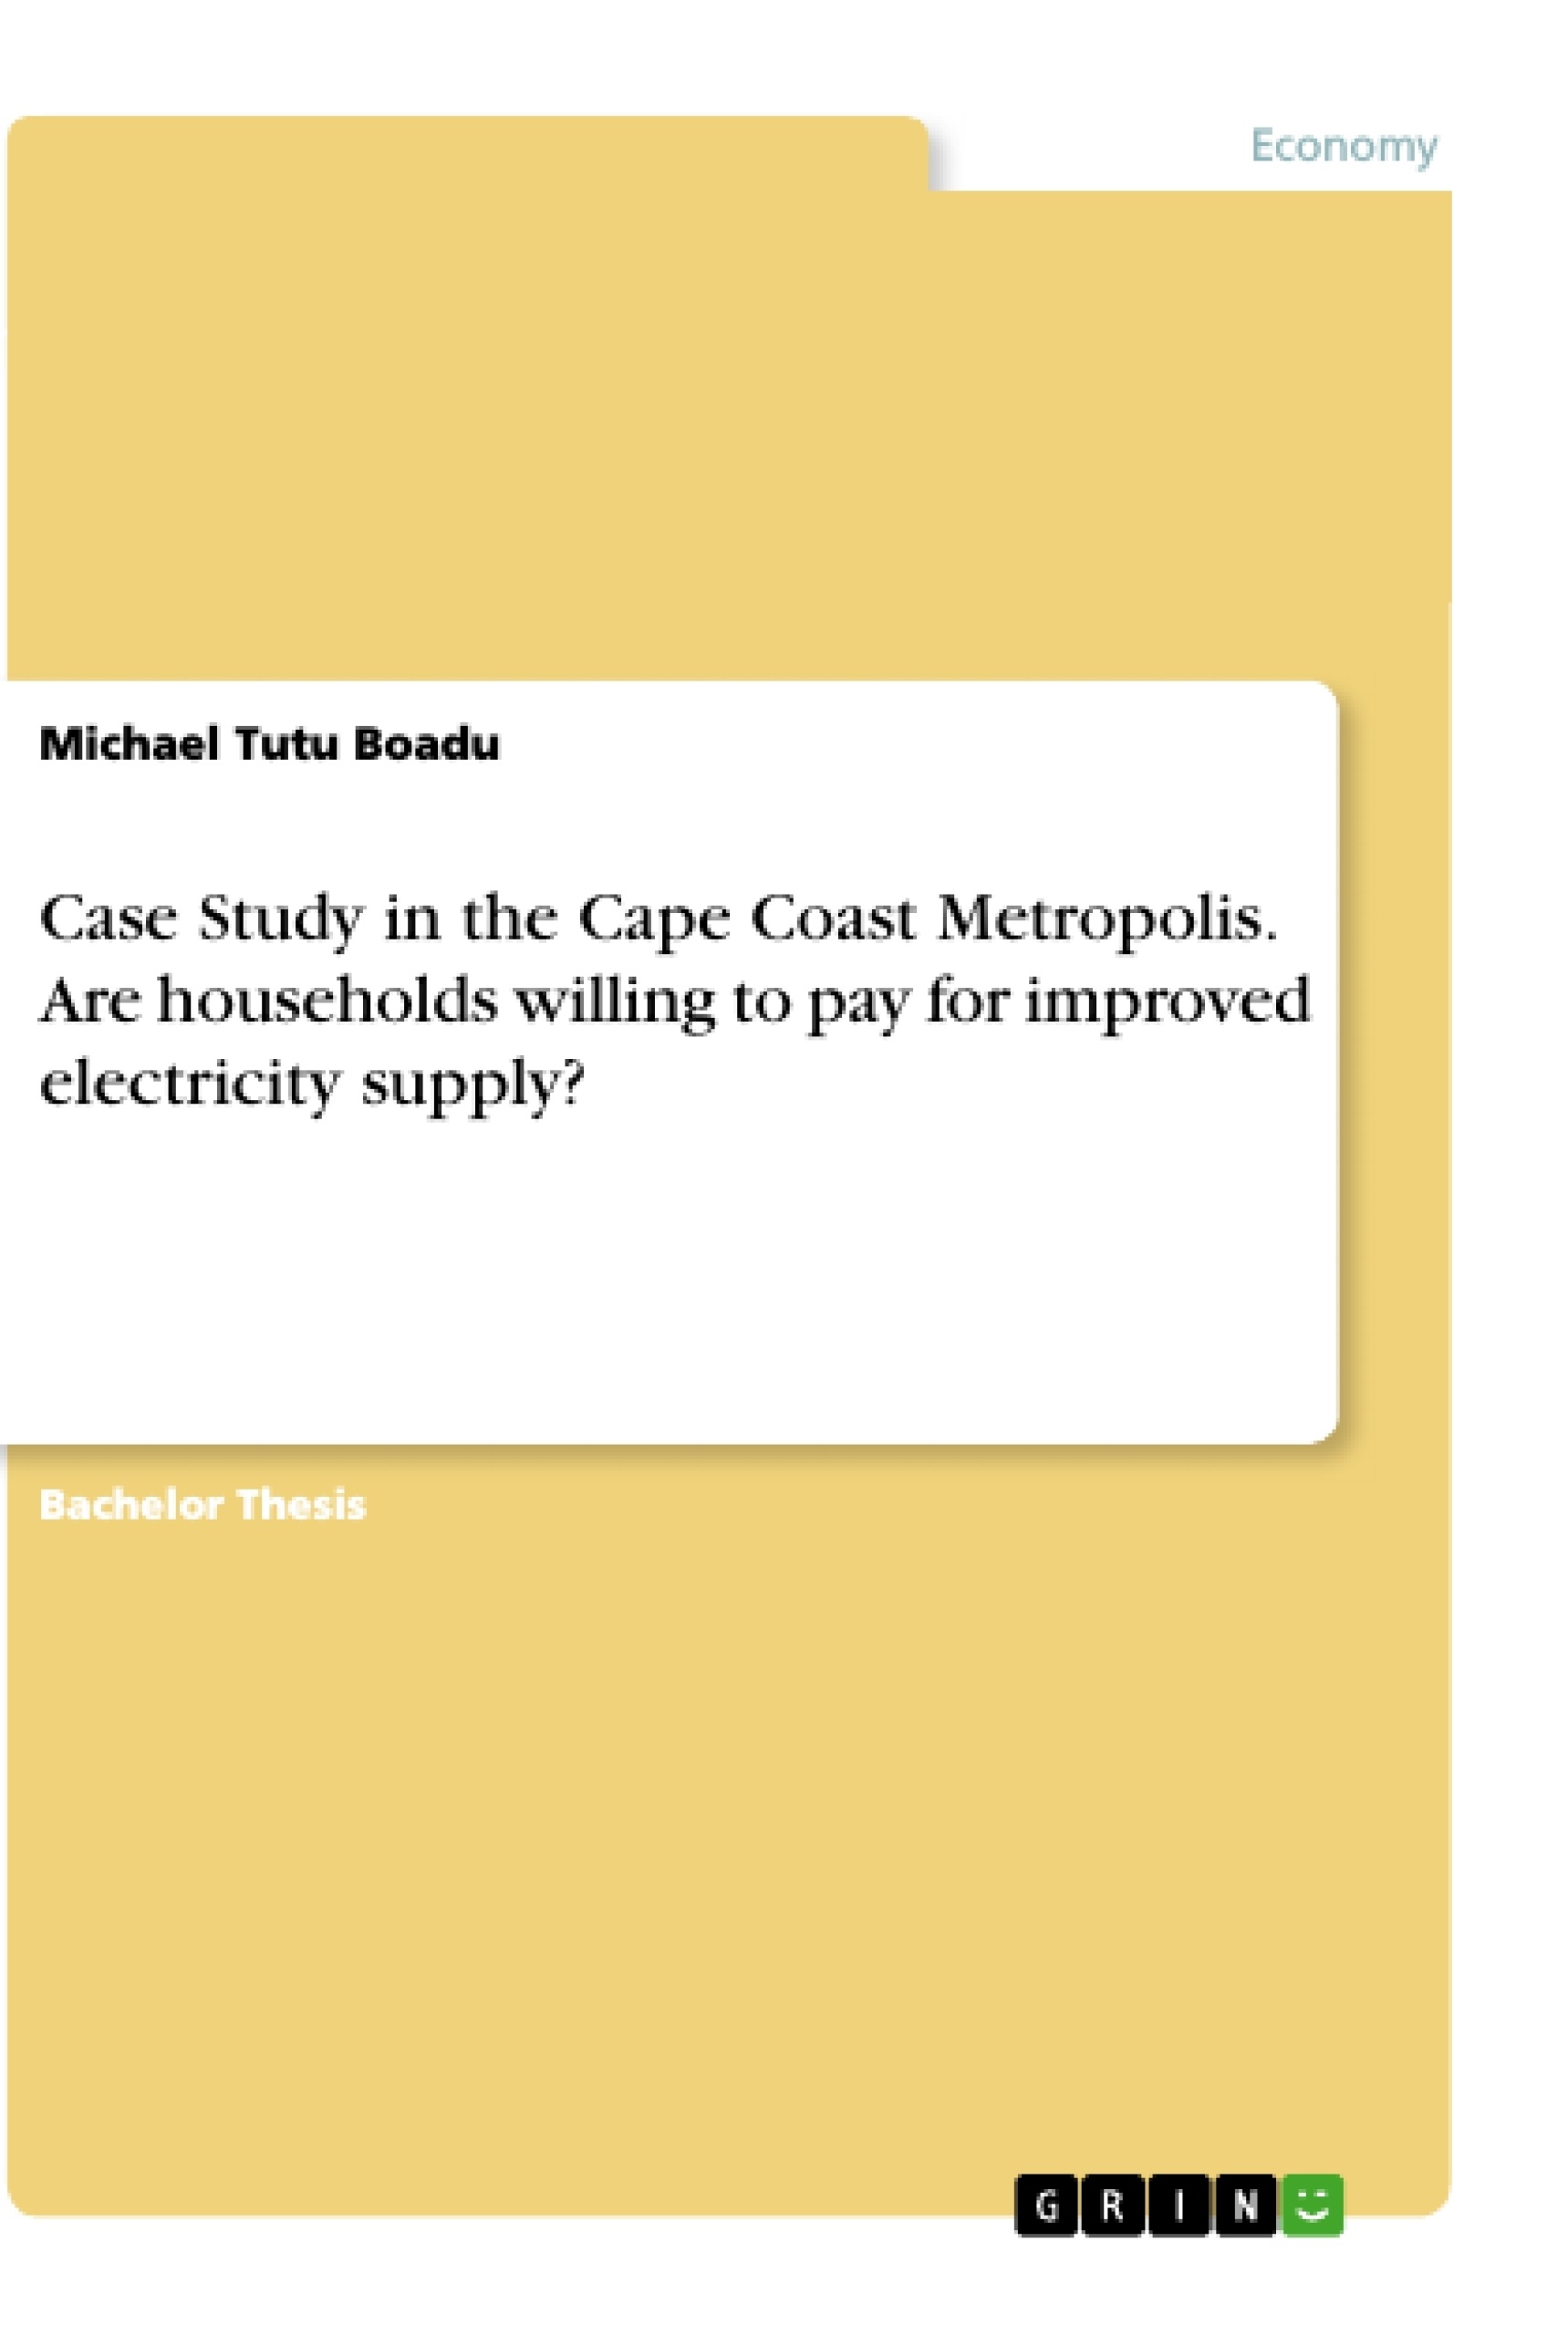 Título: Case Study in the Cape Coast Metropolis. Are households willing to pay for improved electricity supply?